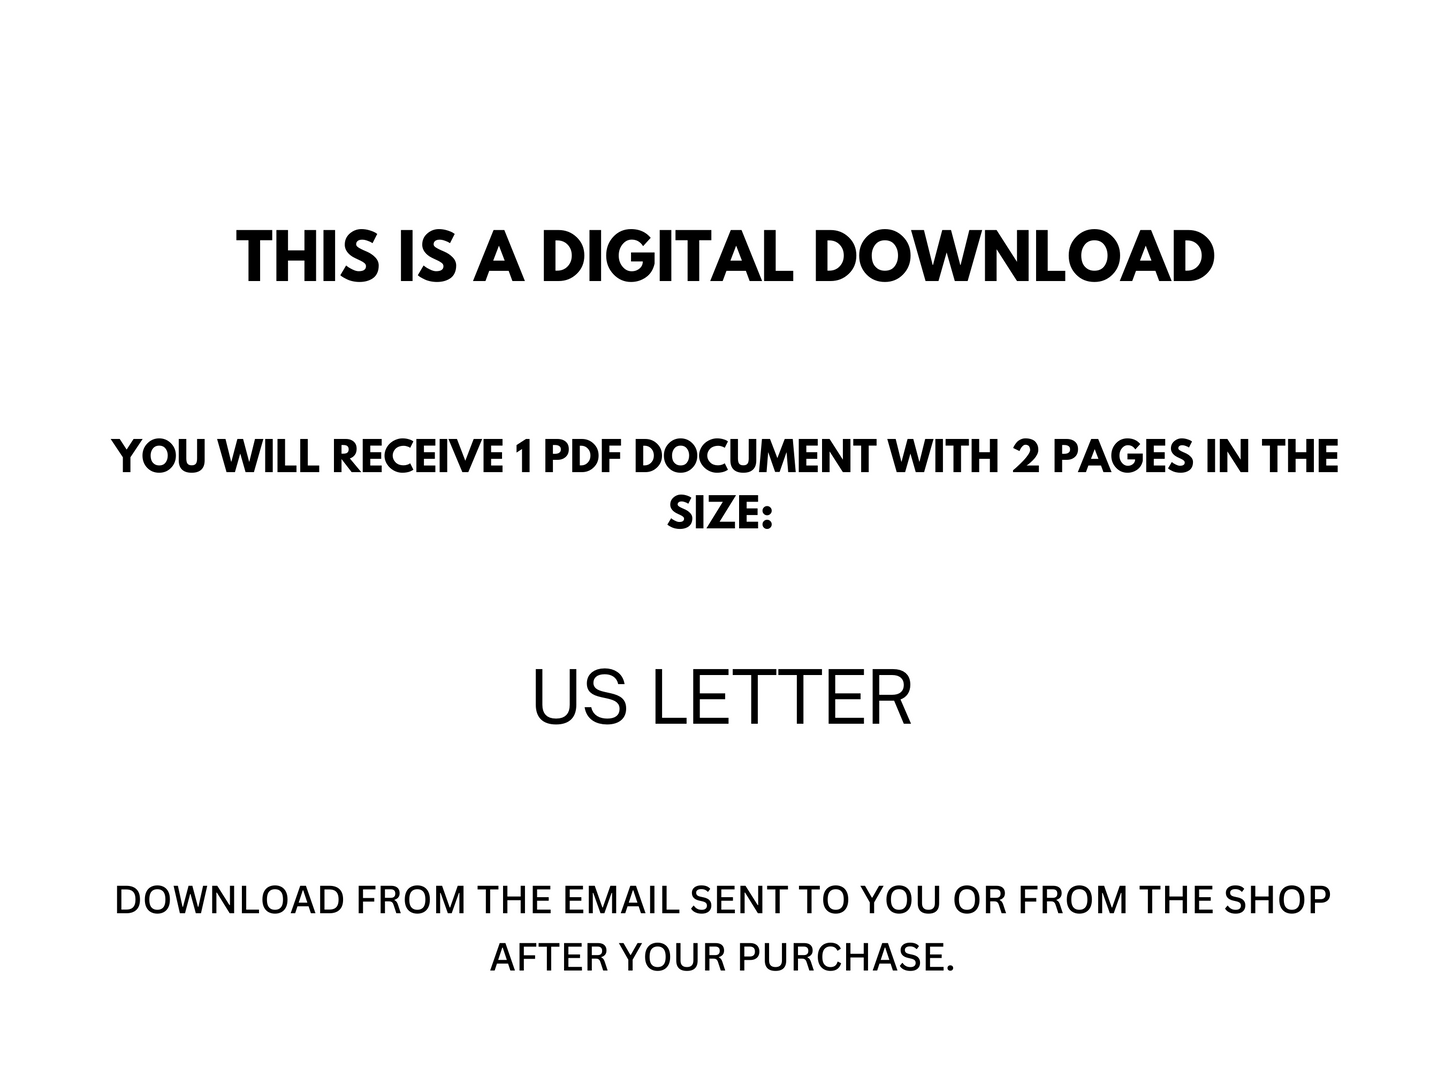 A statement stating the product is a digital download.